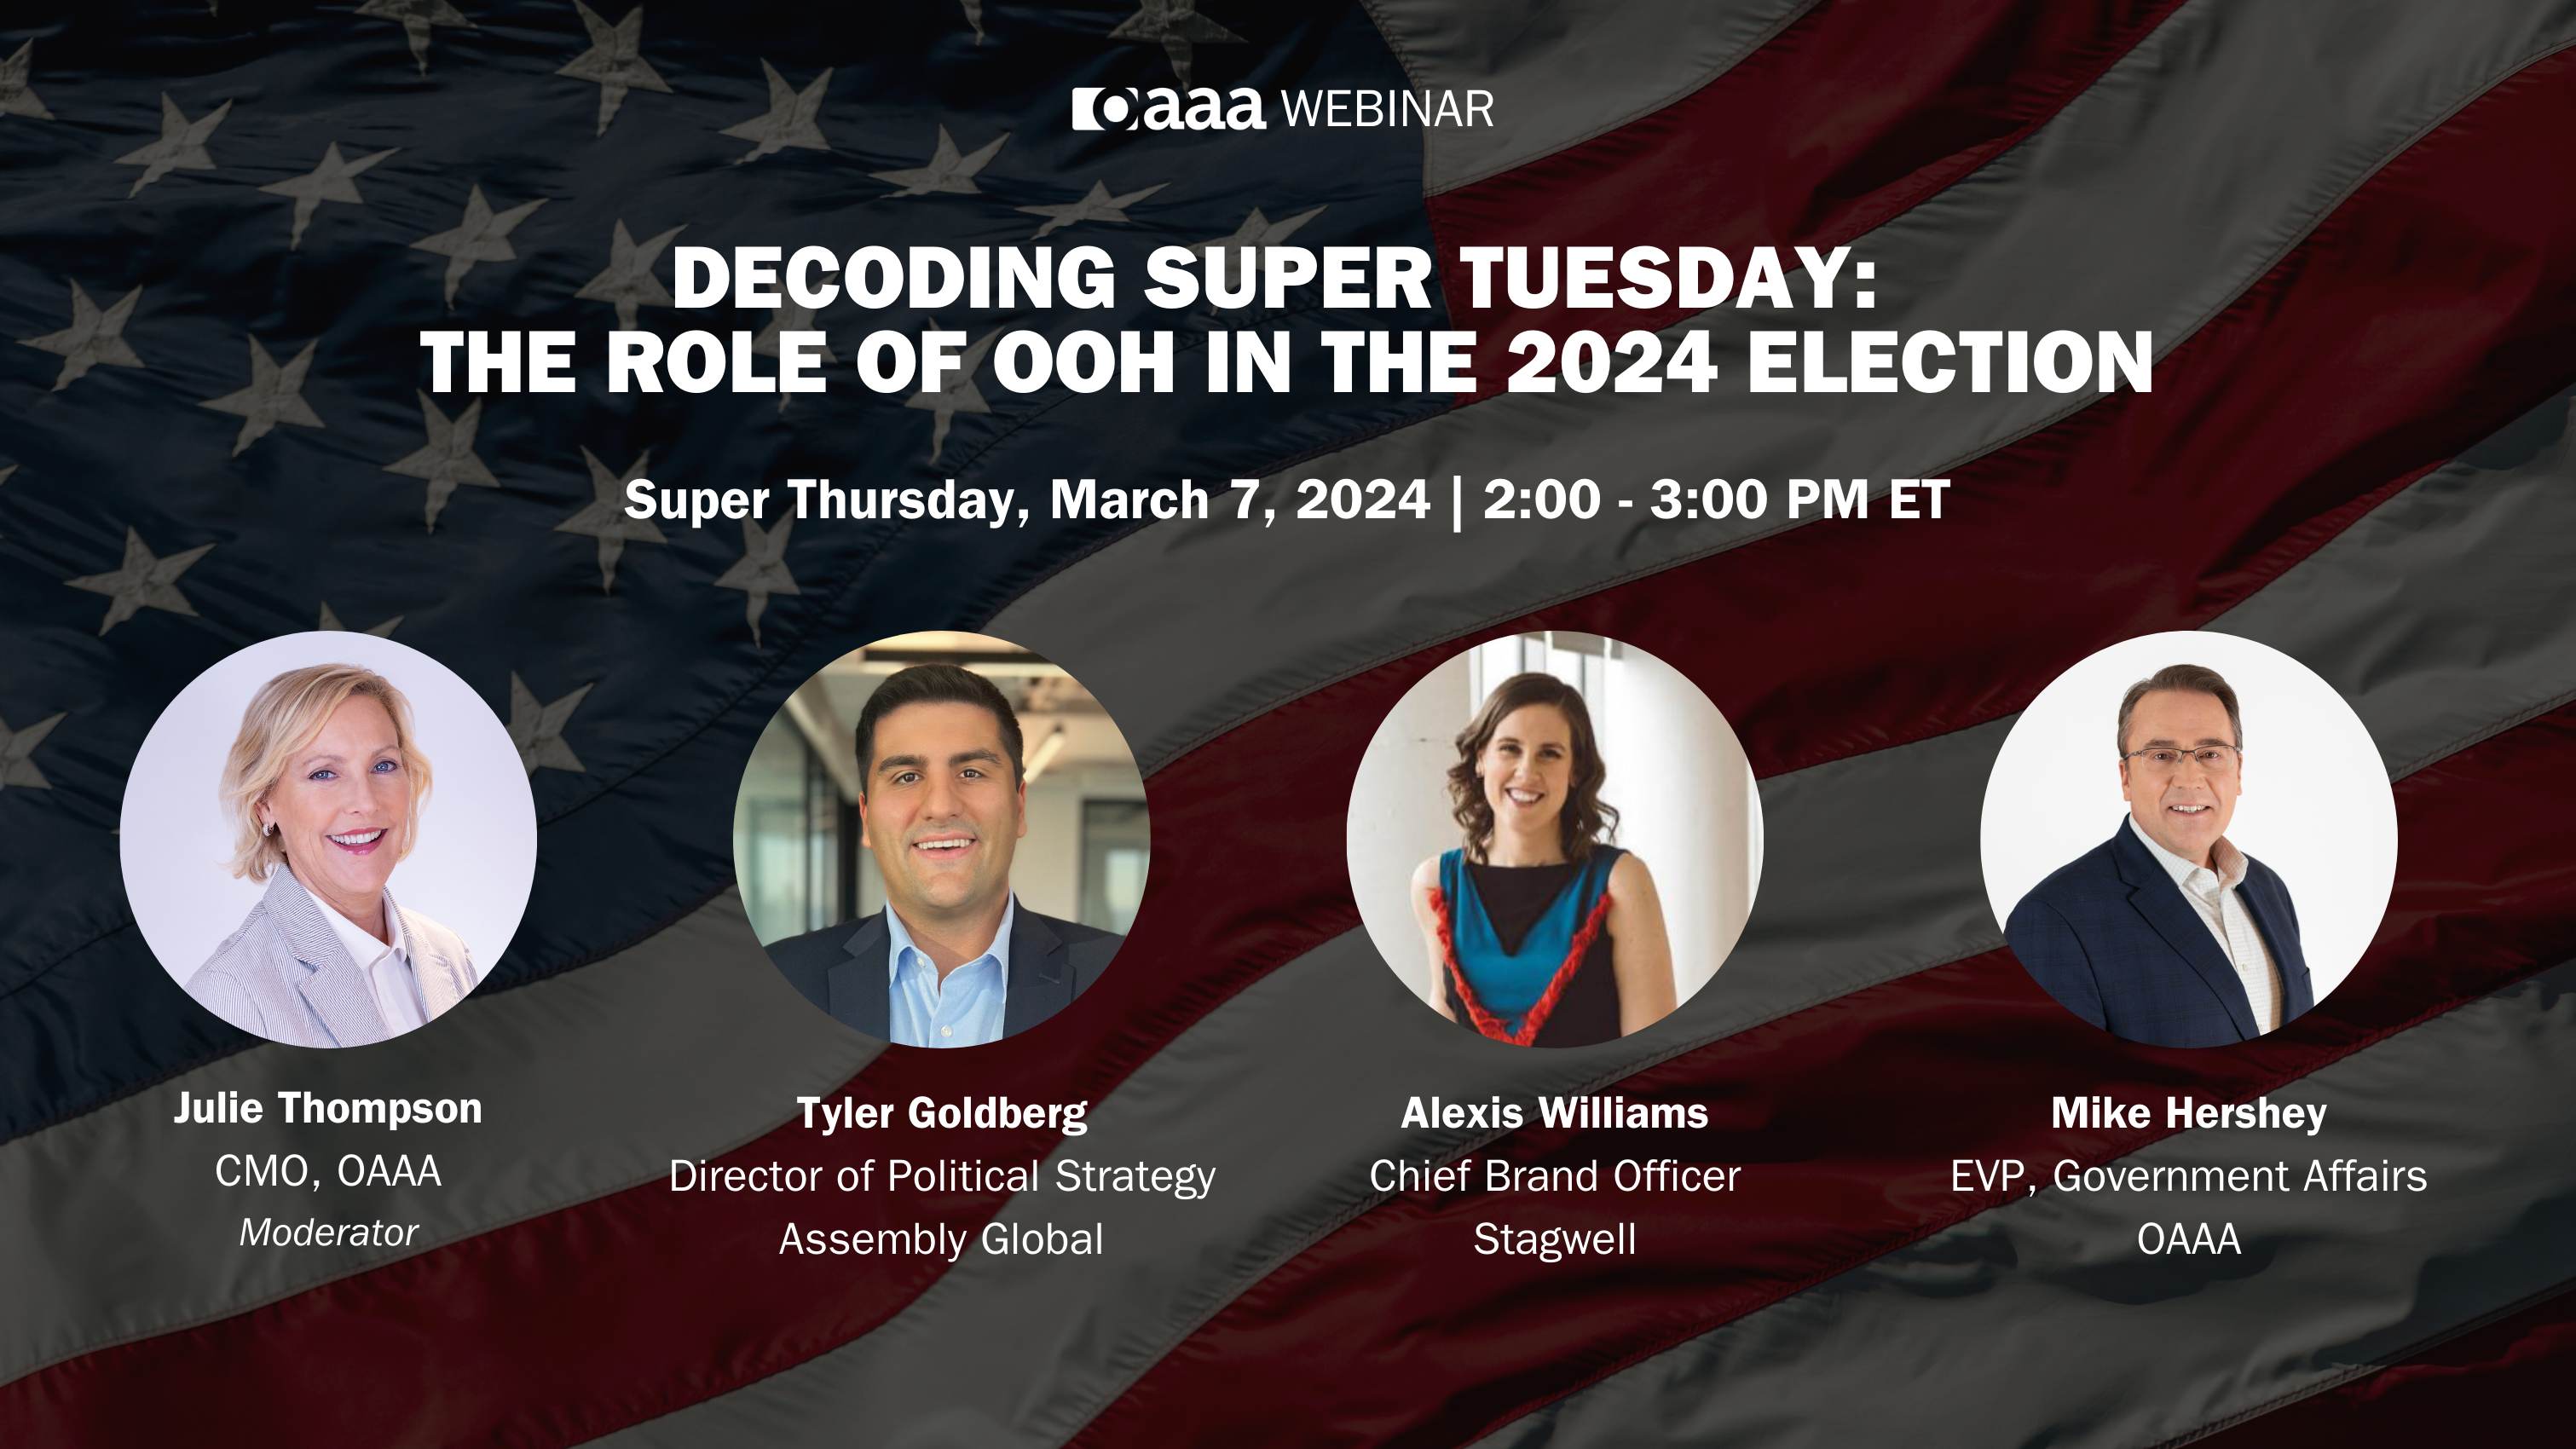 Decoding Super Tuesday: The Role of OOH in the 2024 Election